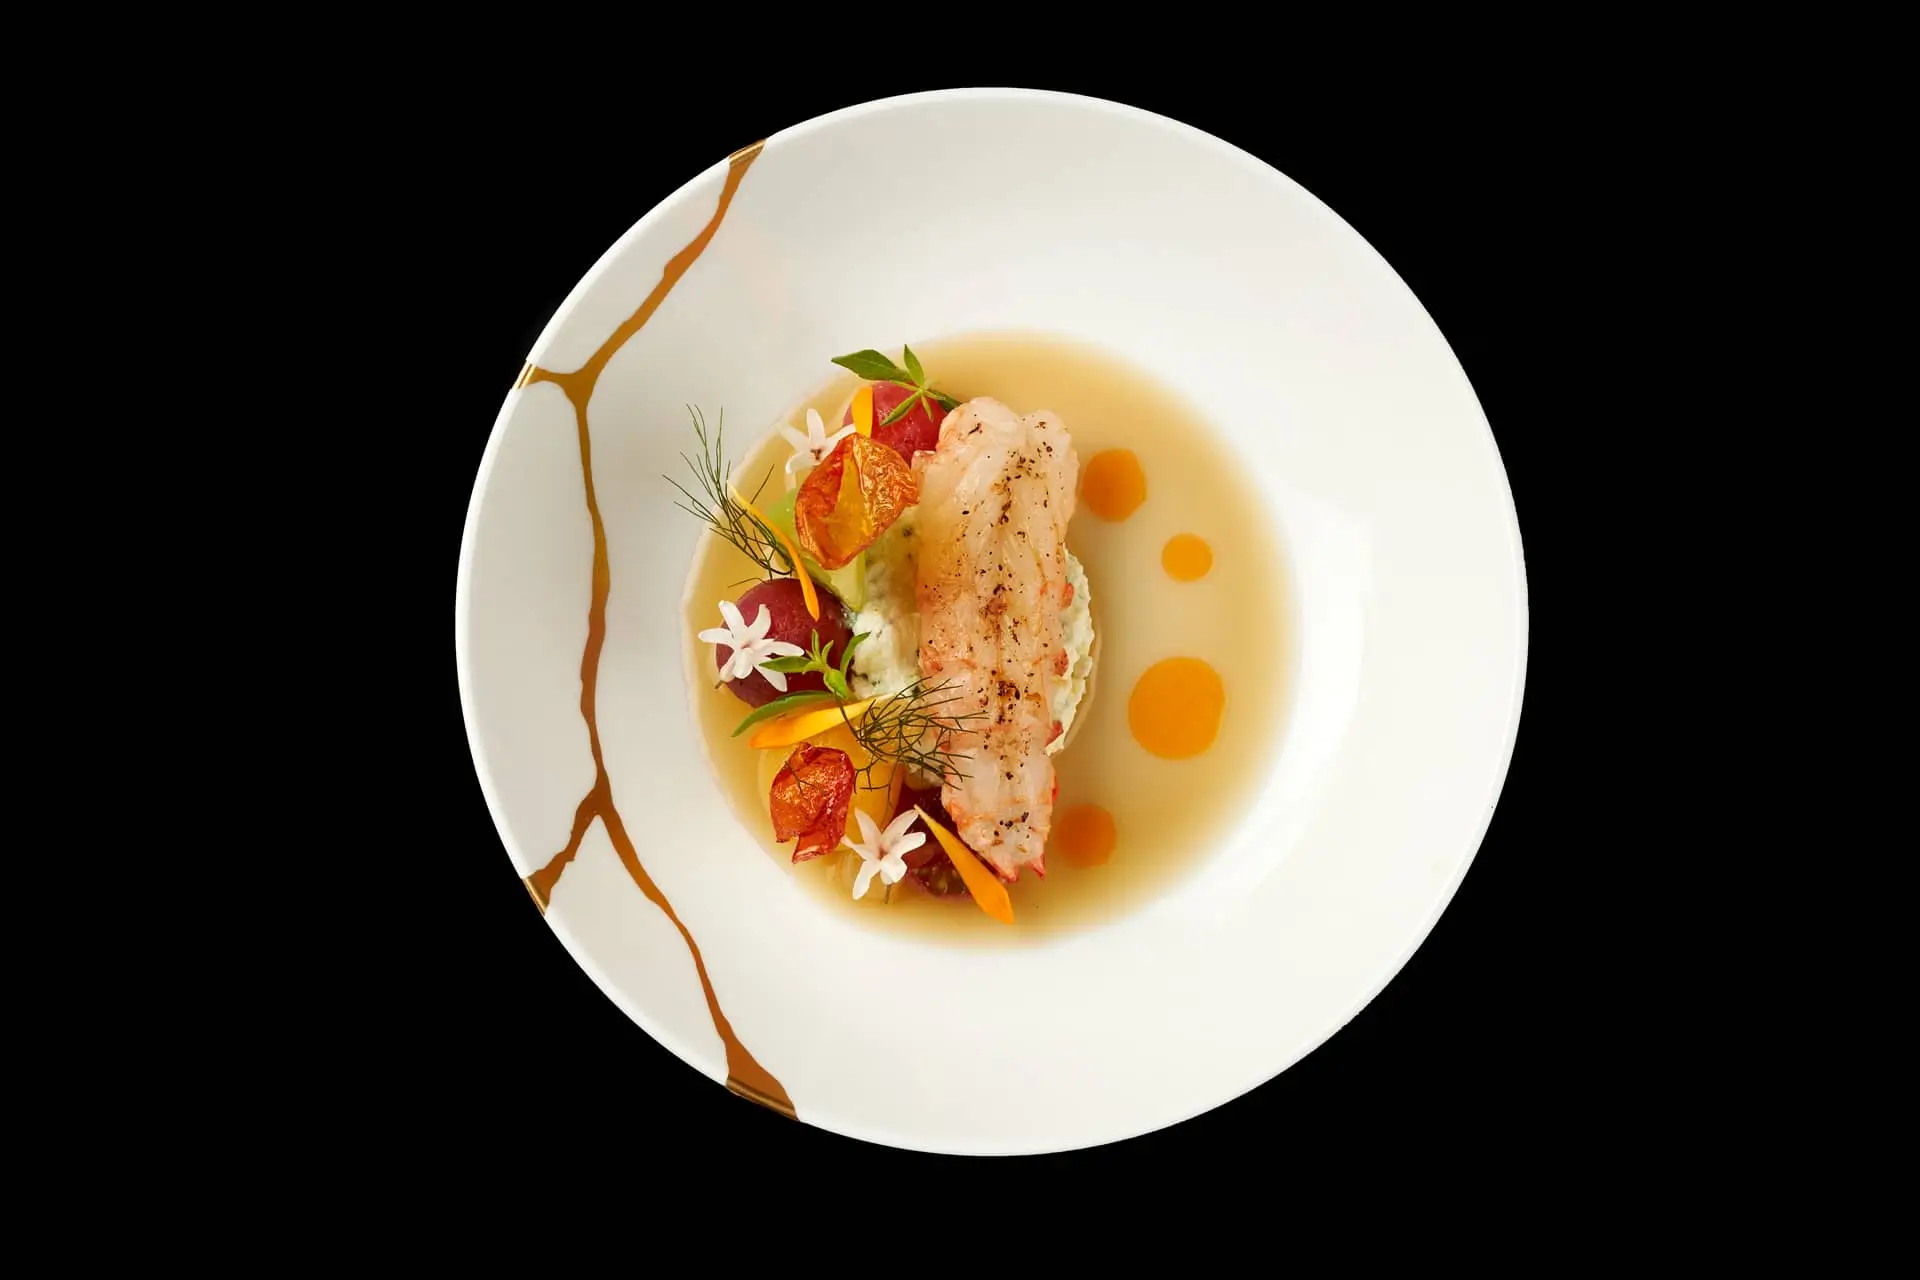 Exquisite plating of a seafood dish at Mallory Gabsi's restaurant, capturing the affordable sophistication of Michelin-star dining in Paris, with a succulent fish filet, colorful garnishes, and artistic sauce on a white plate against a stark black background.